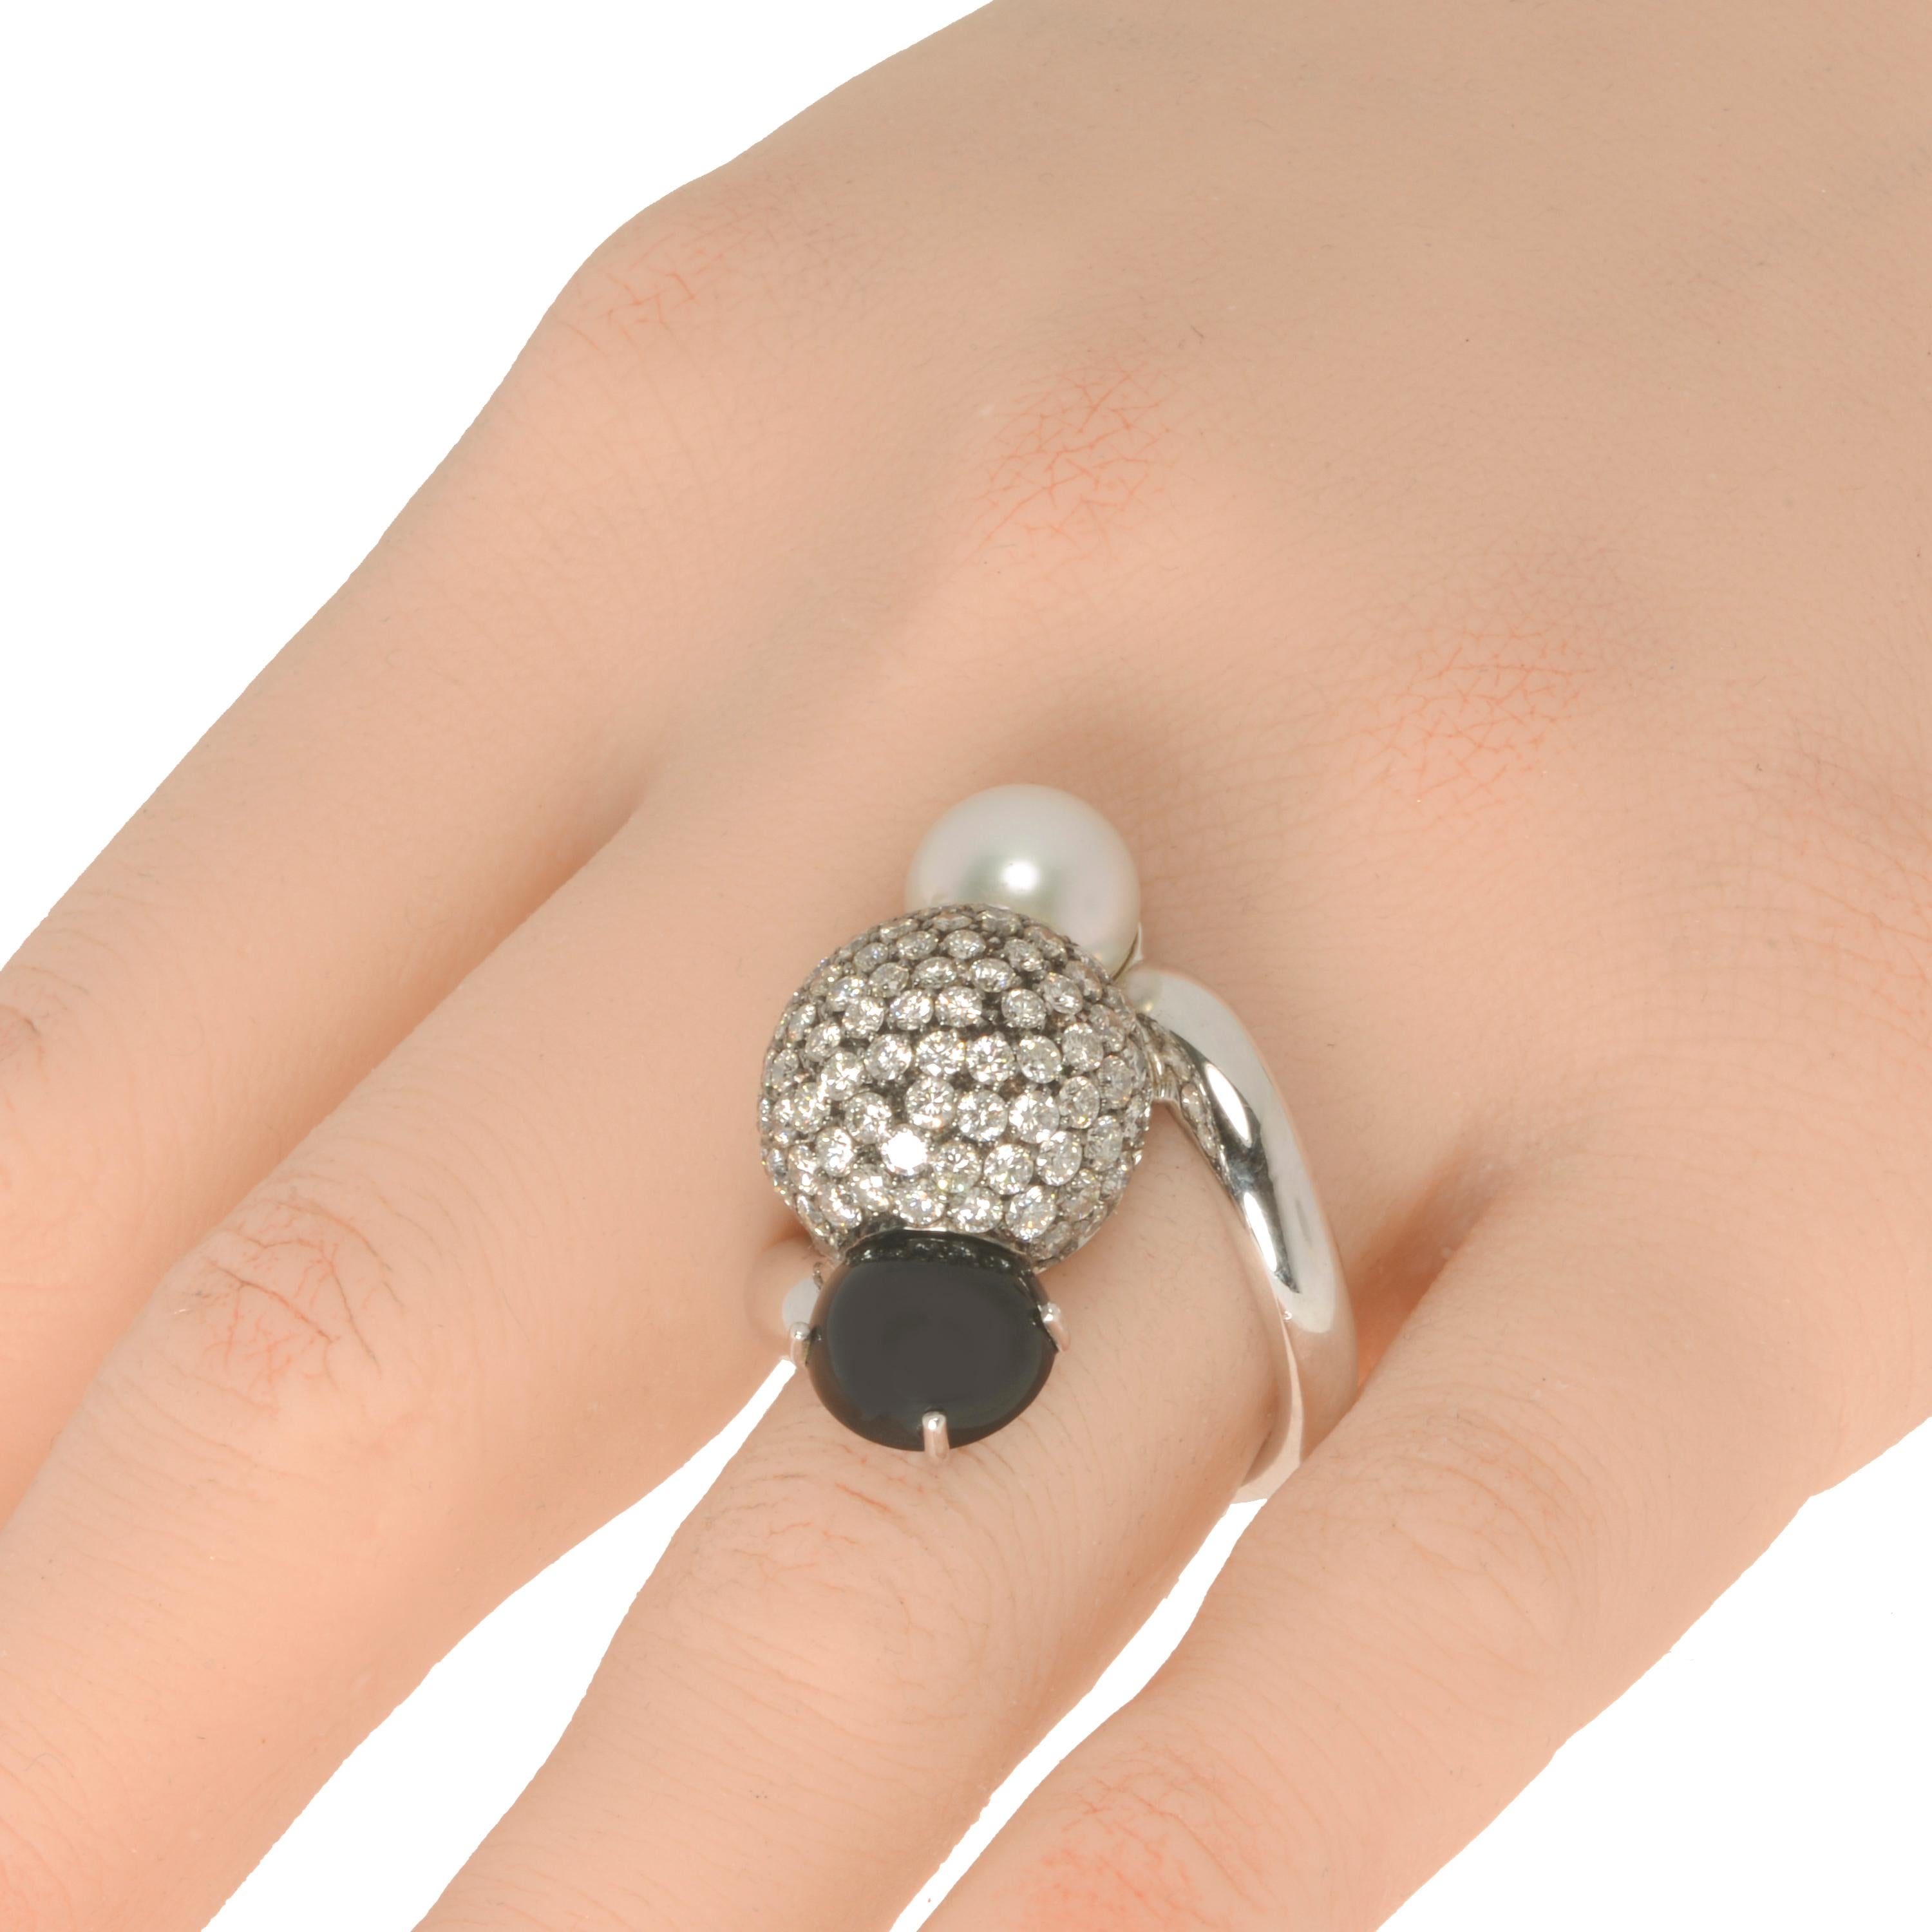 This bejeweled Piero Milano 18K White Gold Cocktail Ring features a shimmering sphere of diamond pave 3.39ct twd with a semi-precious black Onyx 0.3ct on one side and a luminous white 1.2g pearl on the other. The ring size is 7.5. The Decoration